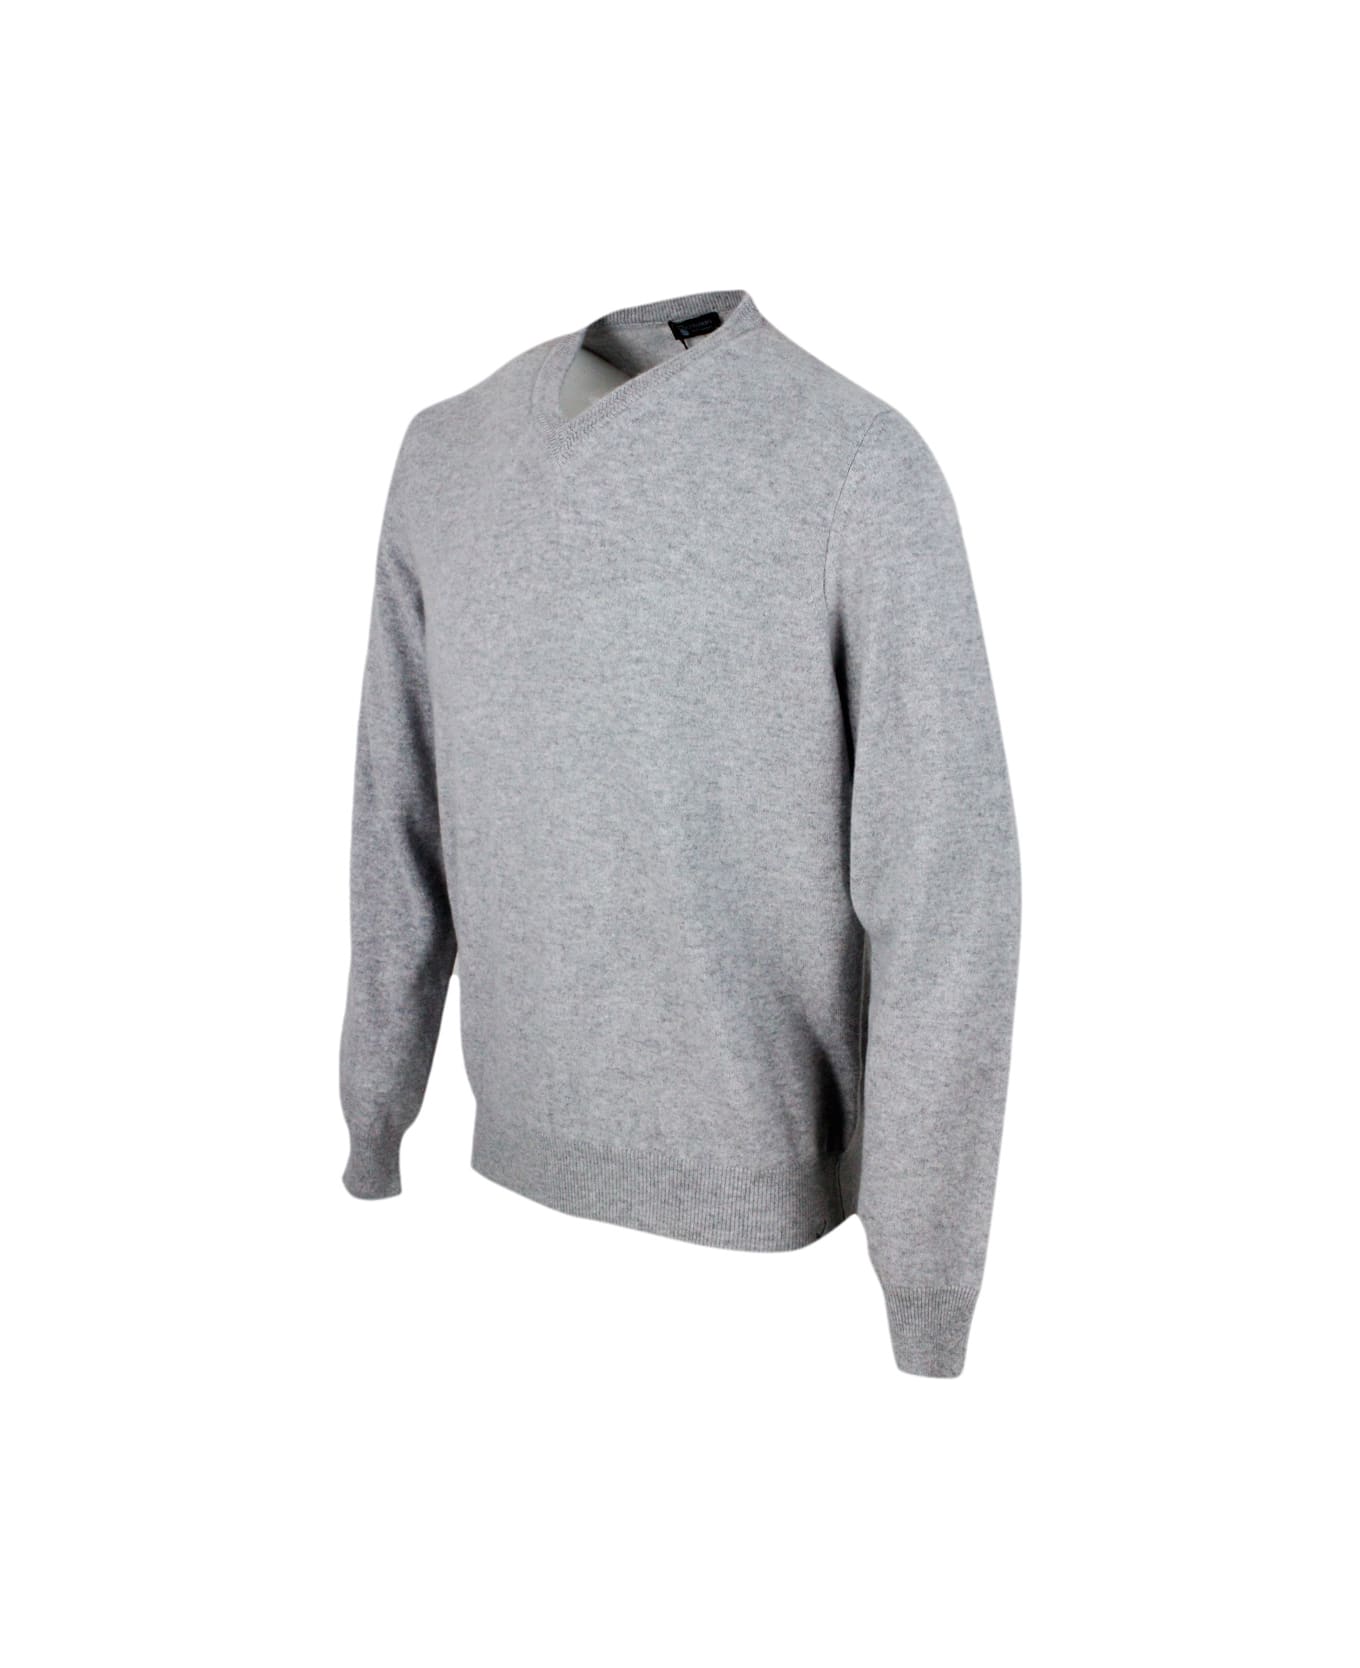 Colombo Long-sleeved V-neck Sweater In Fine 2-ply 100% Kid Cashmere With Special Processing On The Edge Of The Neck - Grey ニットウェア